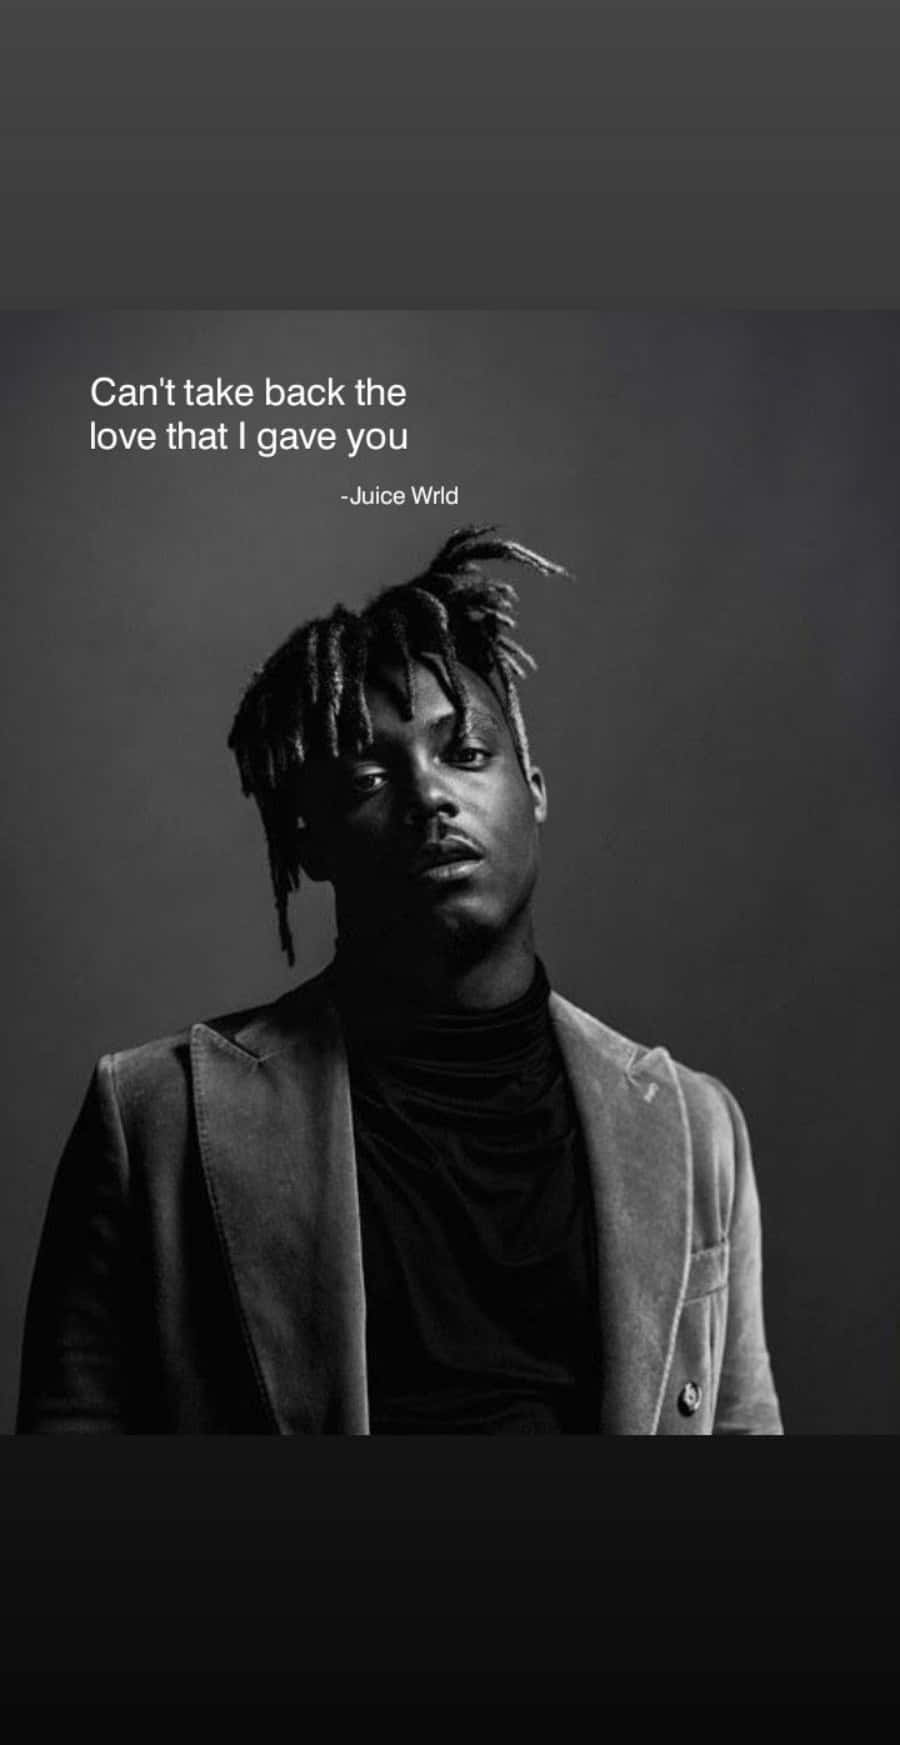 Inspiring Juice Wrld Quote on a Colorful Background Wallpaper